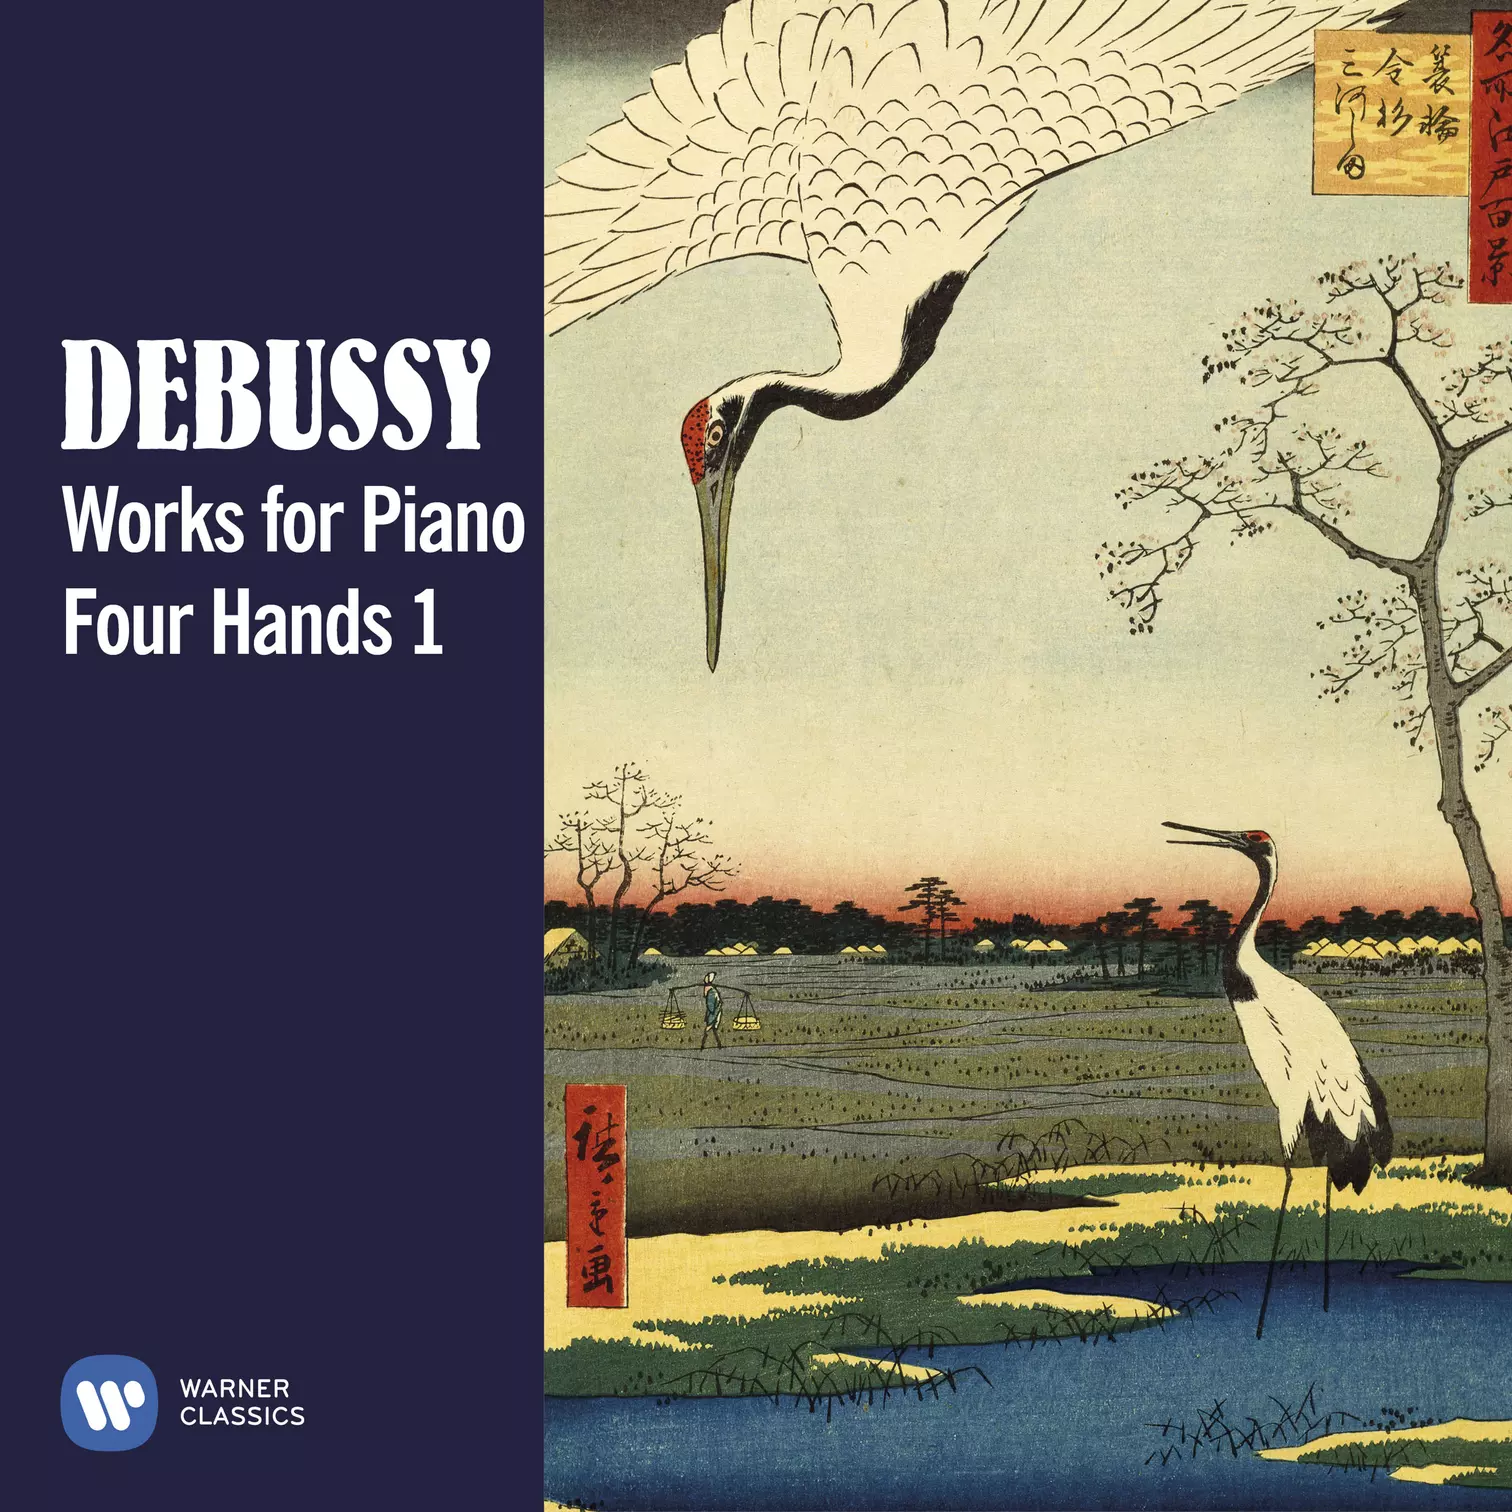 Debussy: Works for Piano Four Hands 1